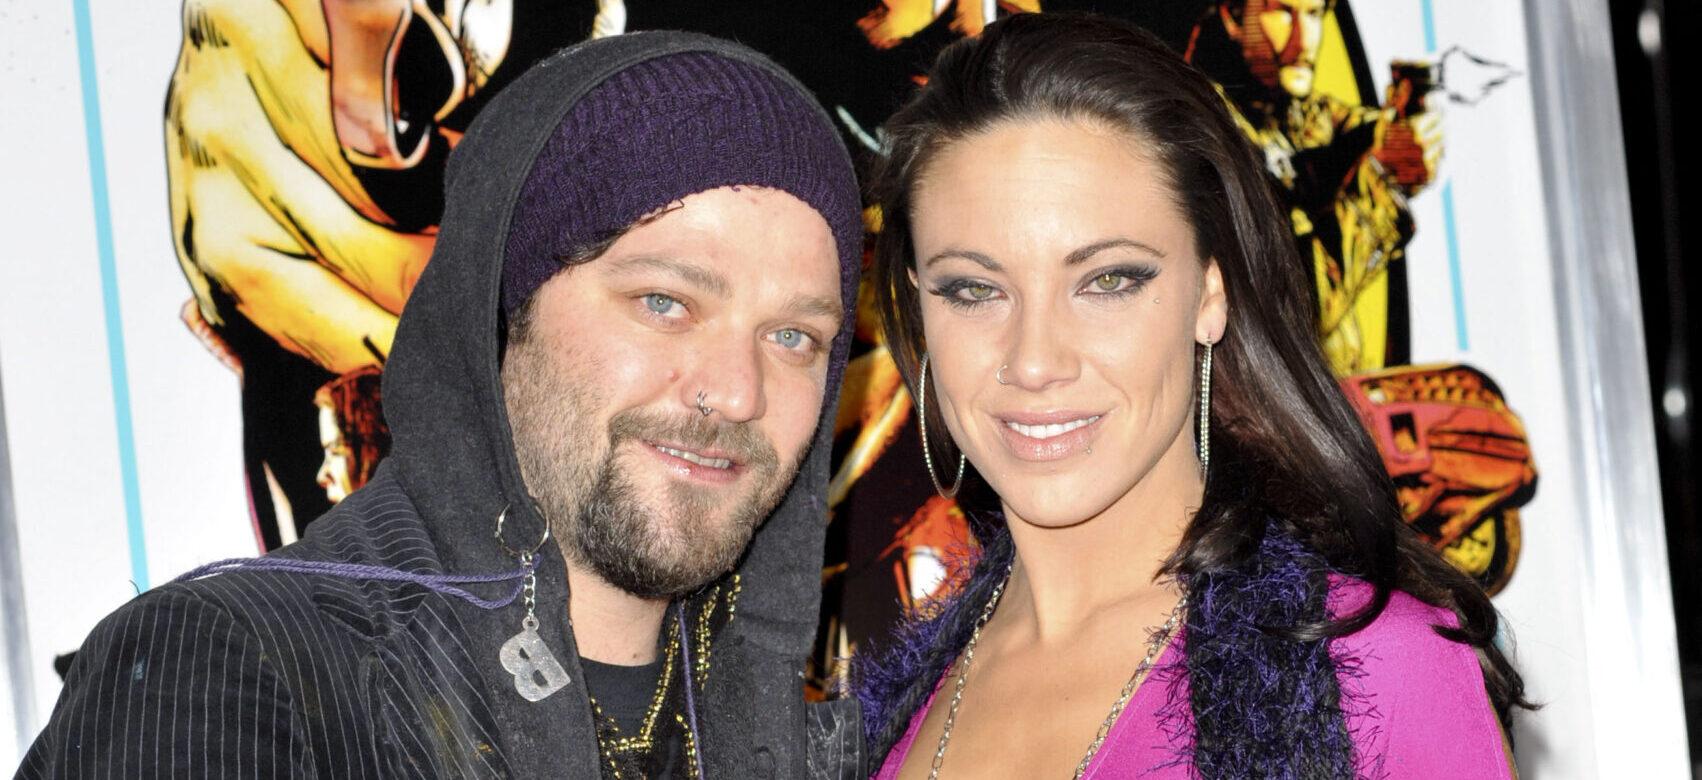 Bam Margera Granted Monitored Visitation With His Son After ‘200 Days’ Away From Him